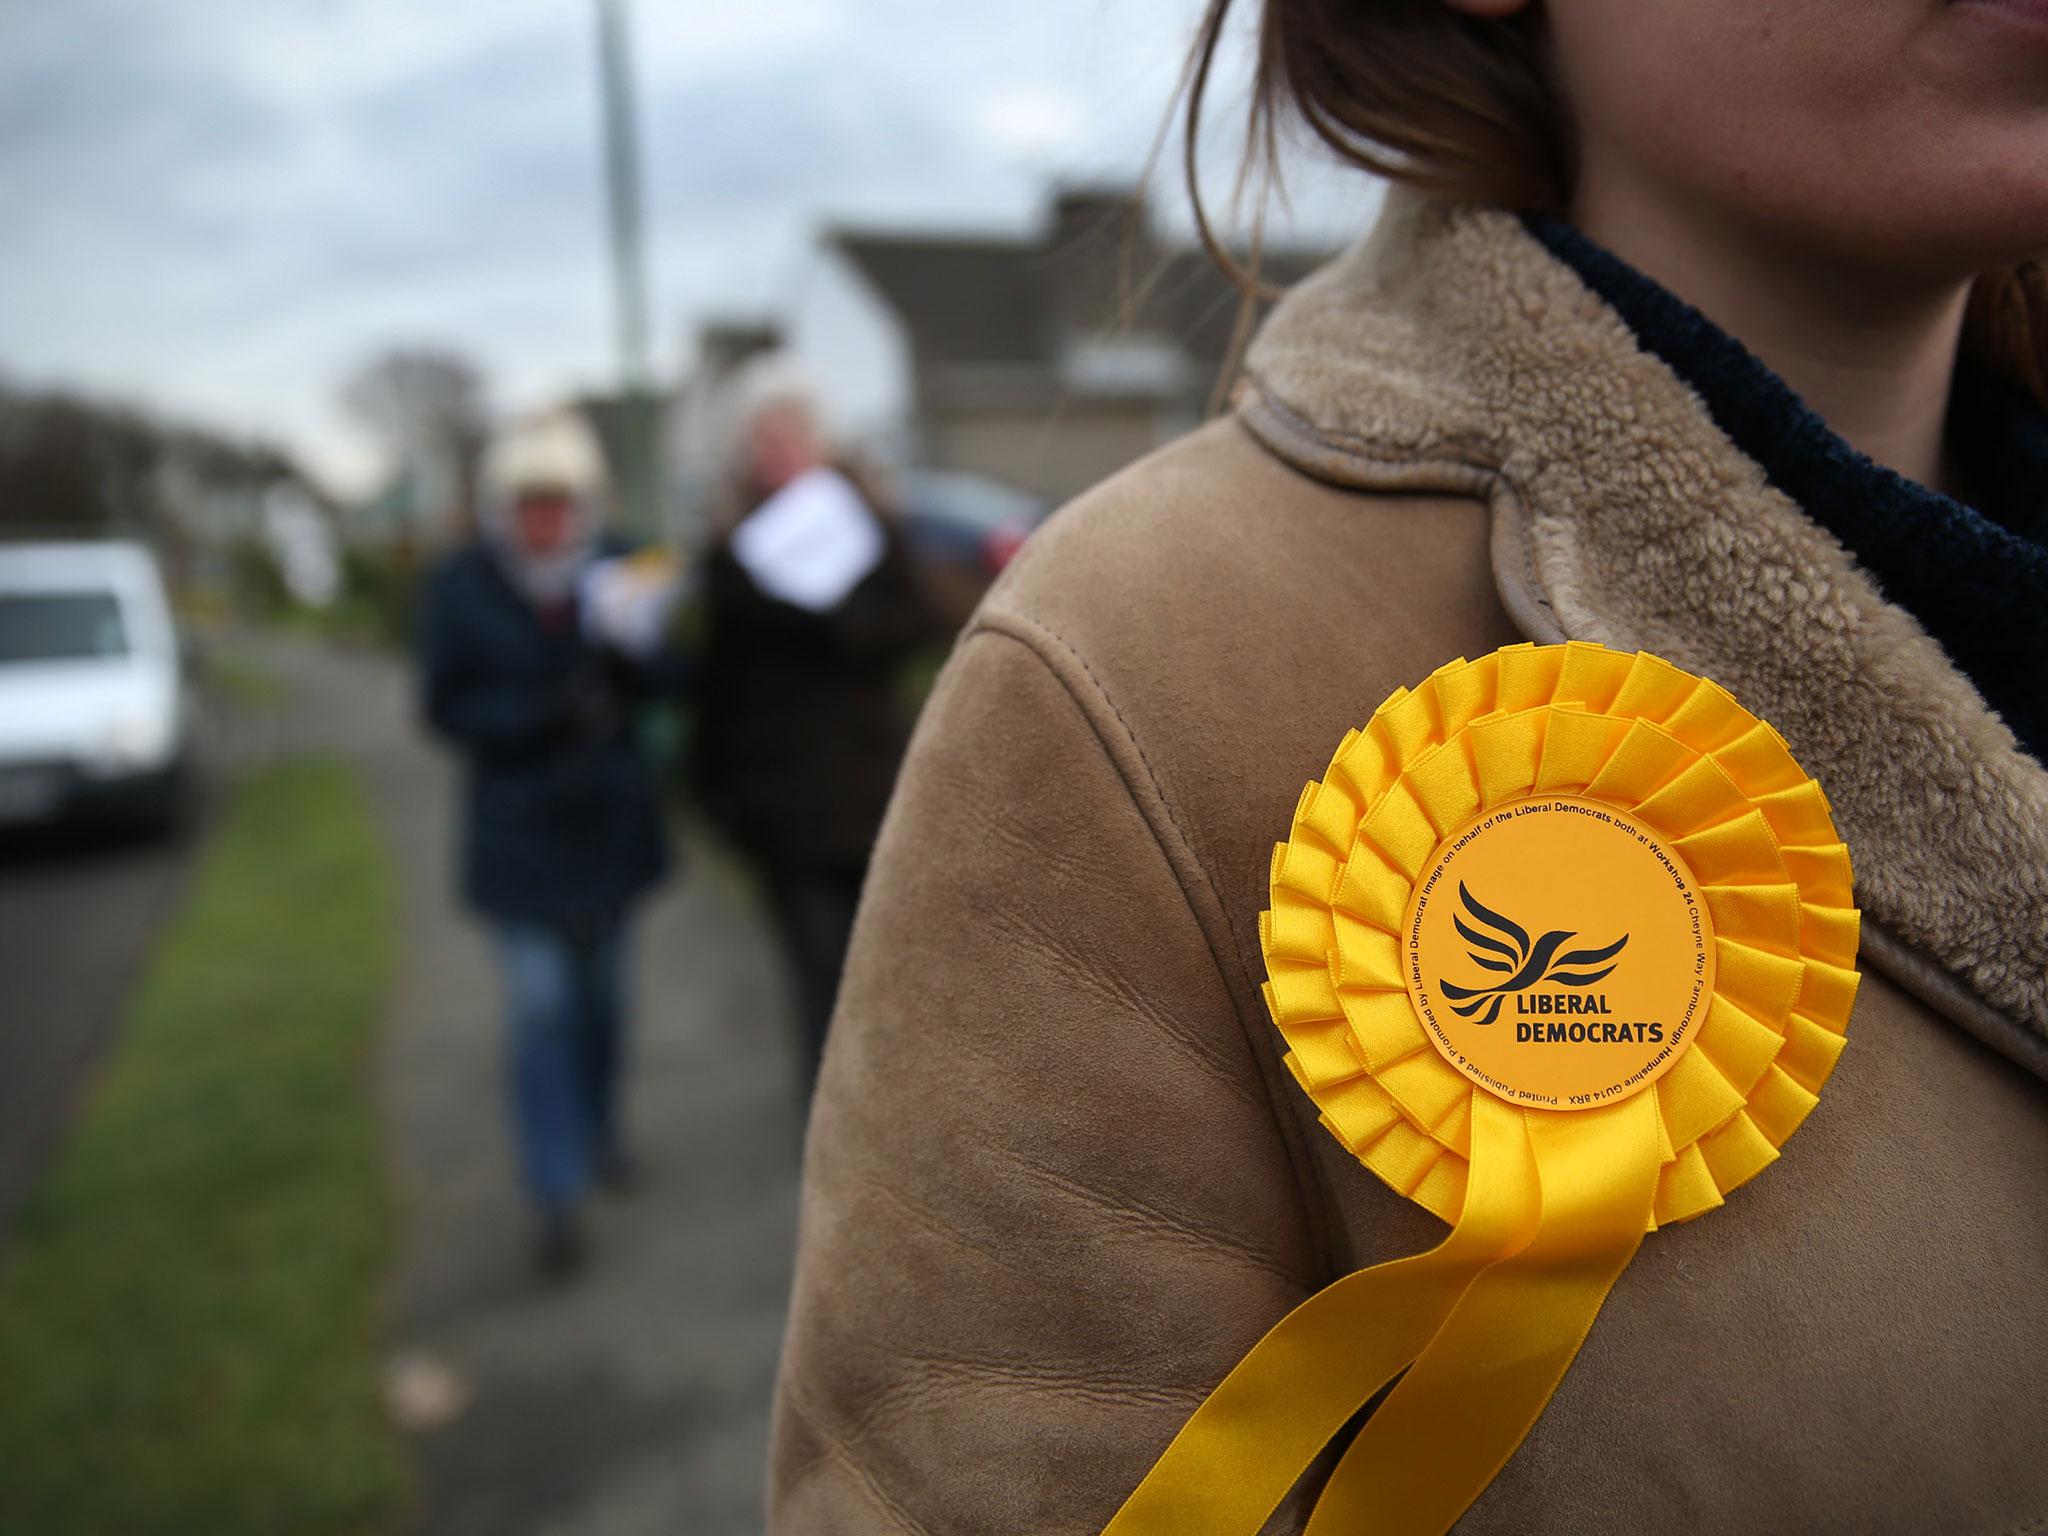 The parties are united behind Lib Dem candidate Jane Dodds